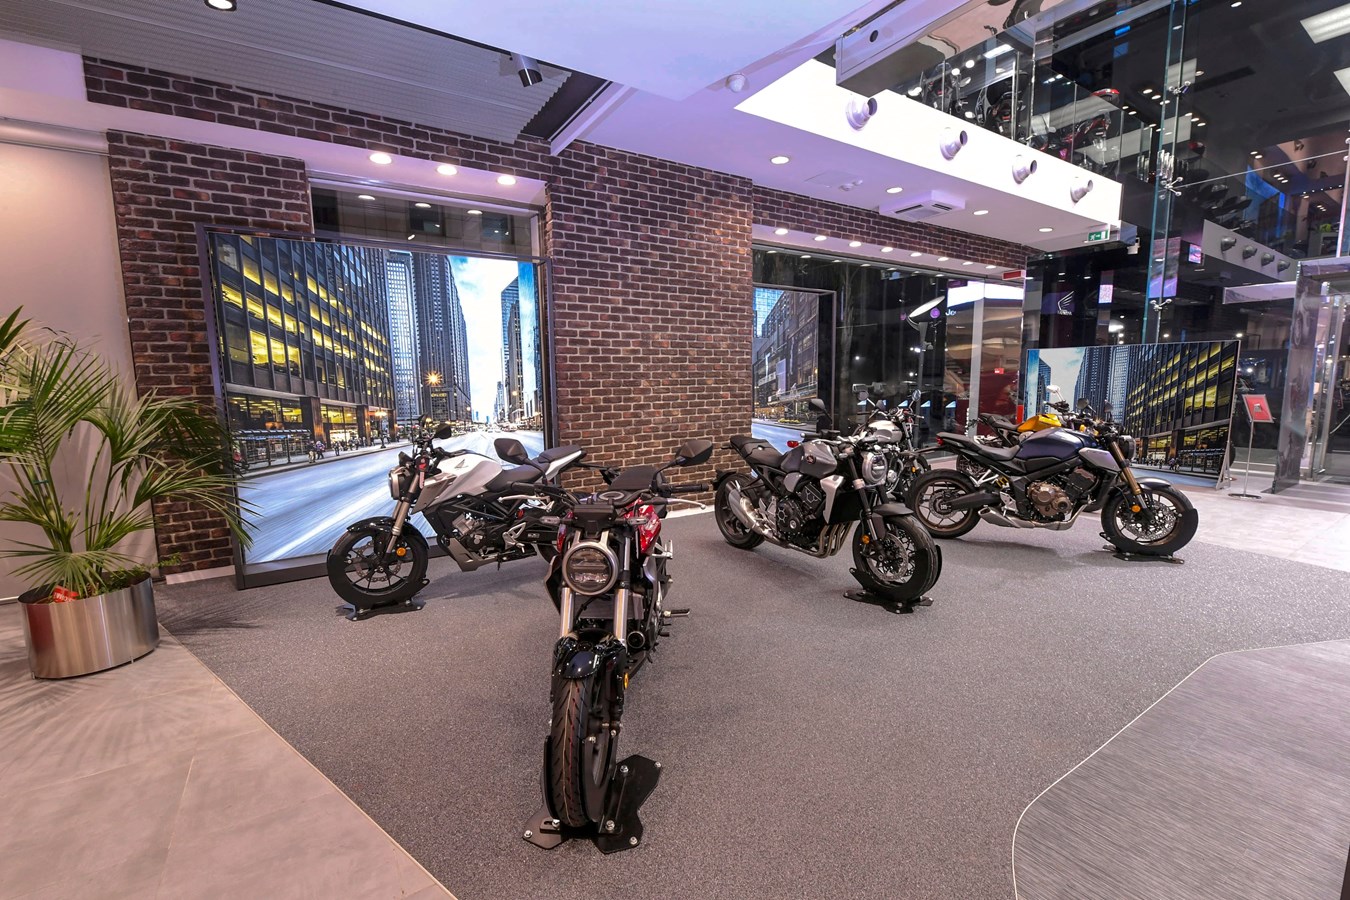 Honda Begins Roll Out Of New Dream Dealer Concept With The Creation Of Flagship Dealership In Rome